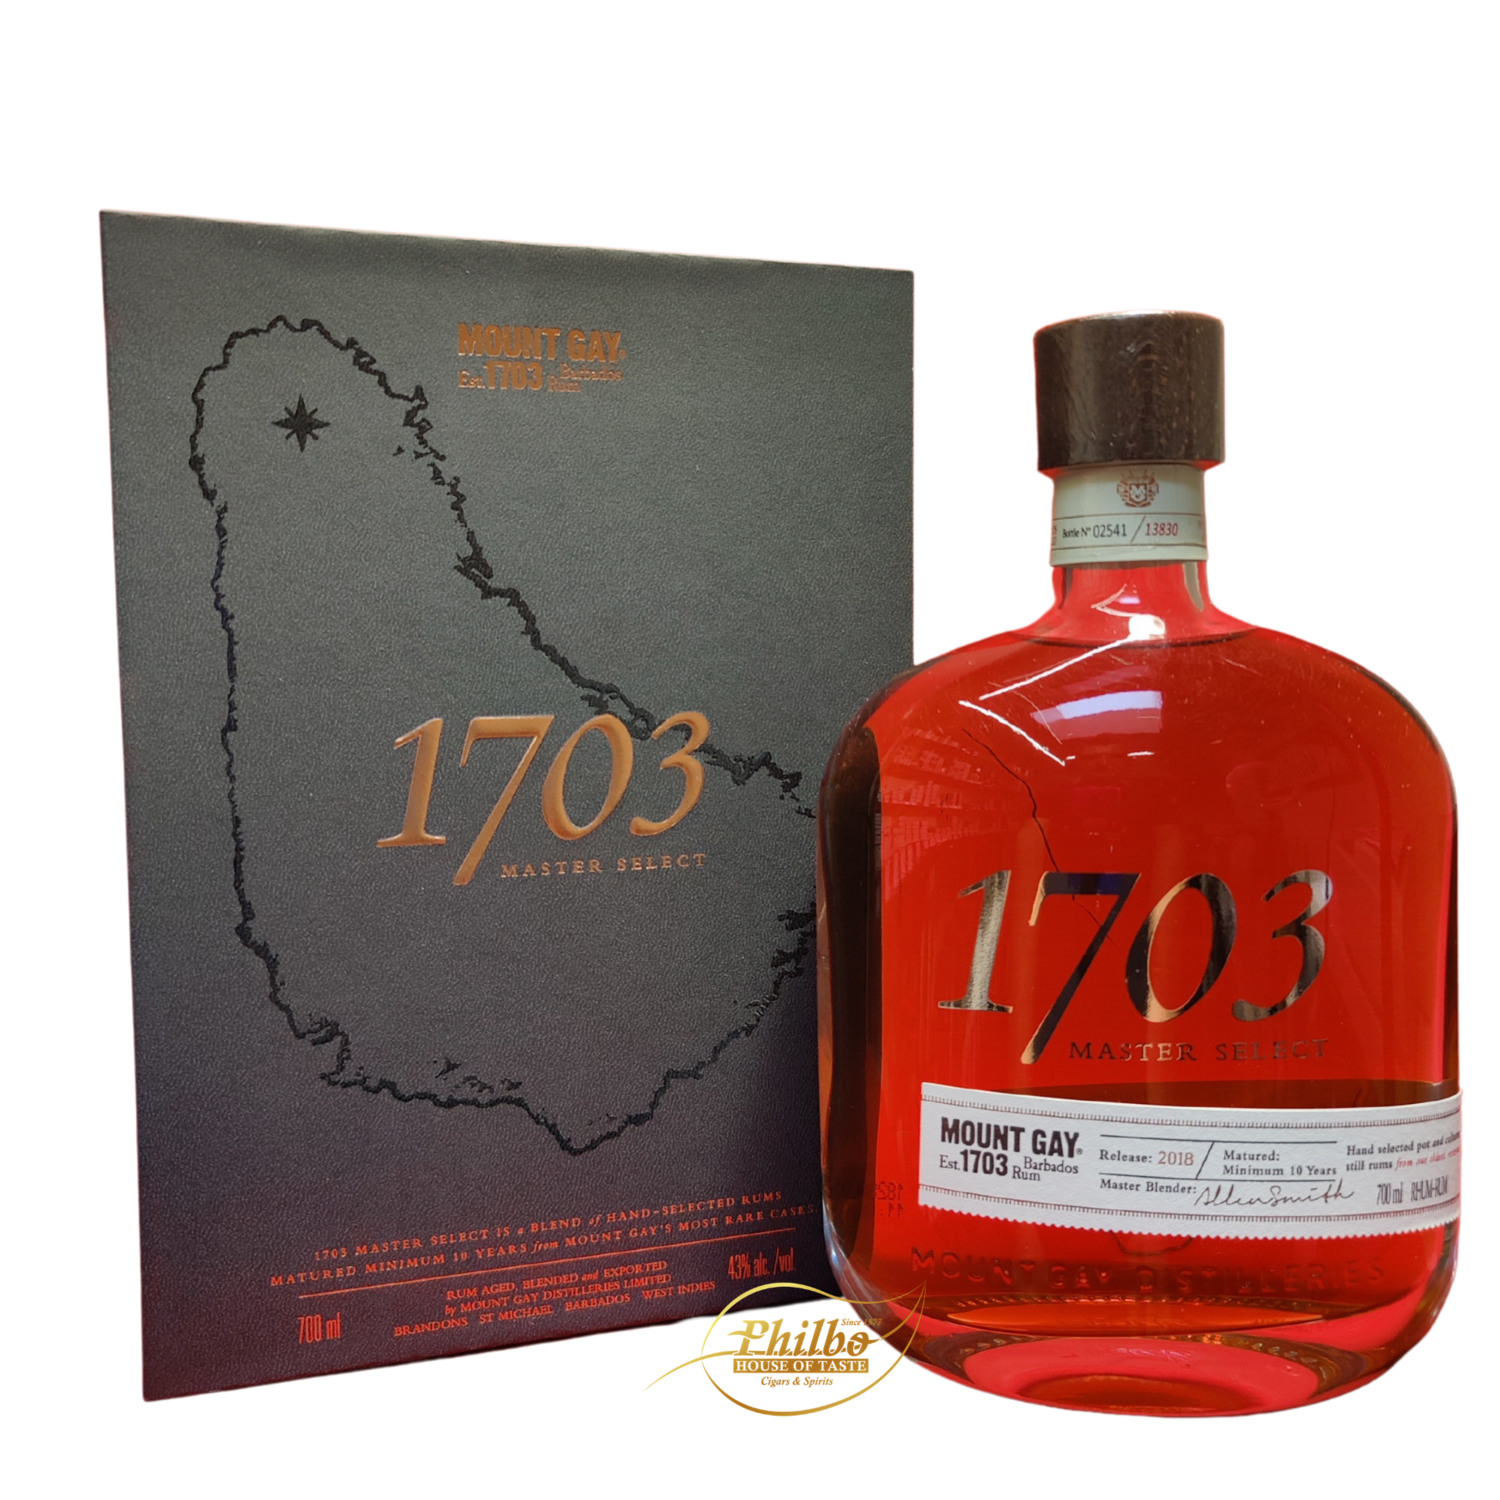 Mount Gay 1703 Master Select 2018 43% 70cl